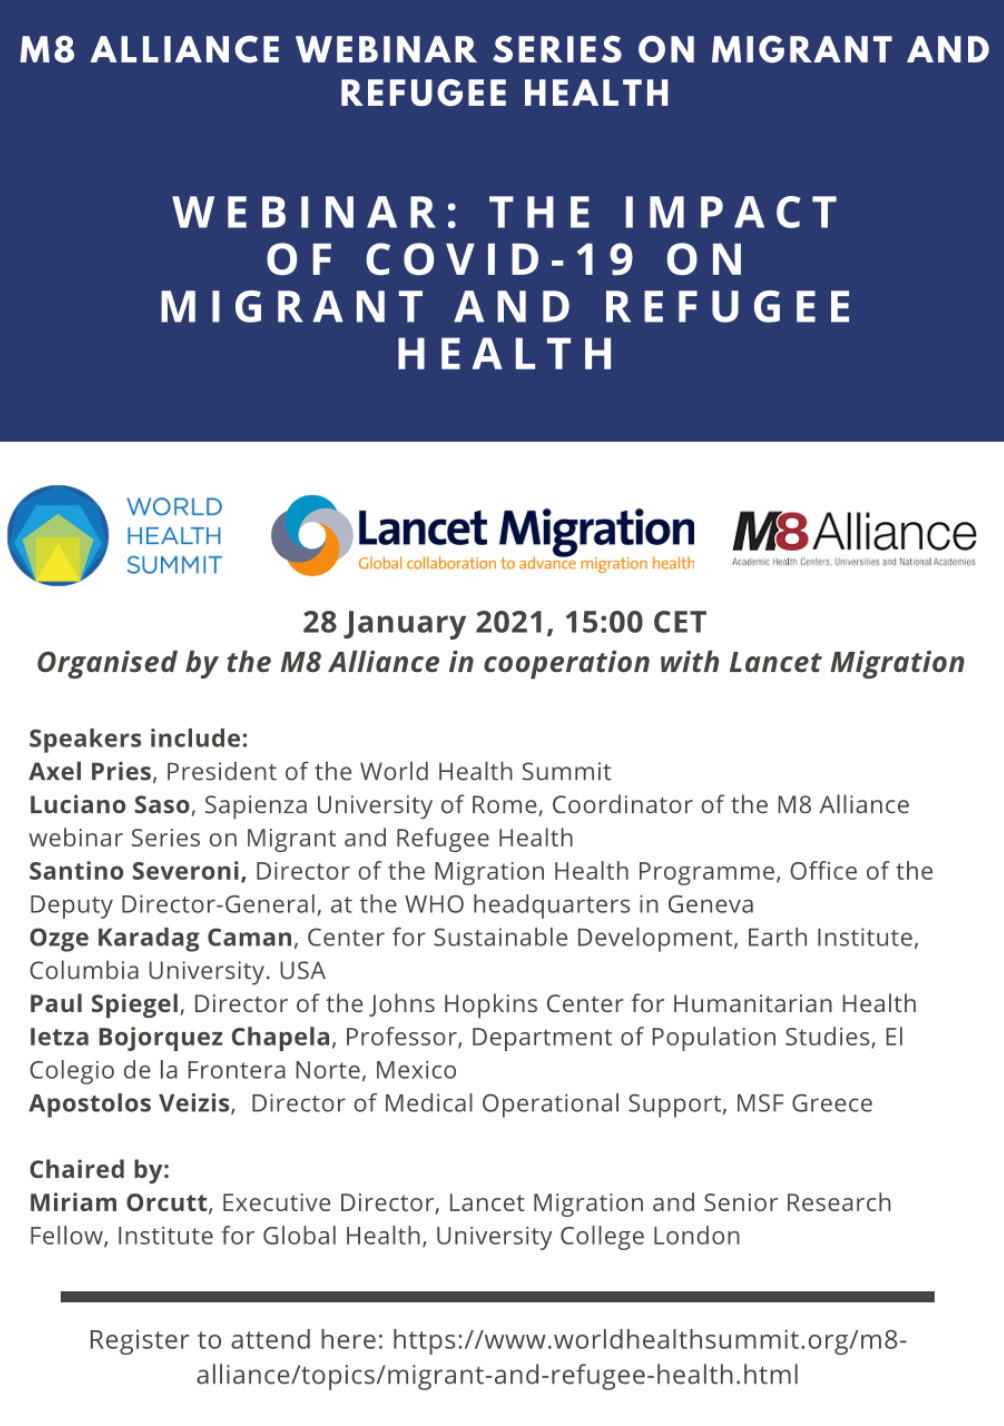 The Impact of COVID-19 on Migrant and Refugee Health webinar 